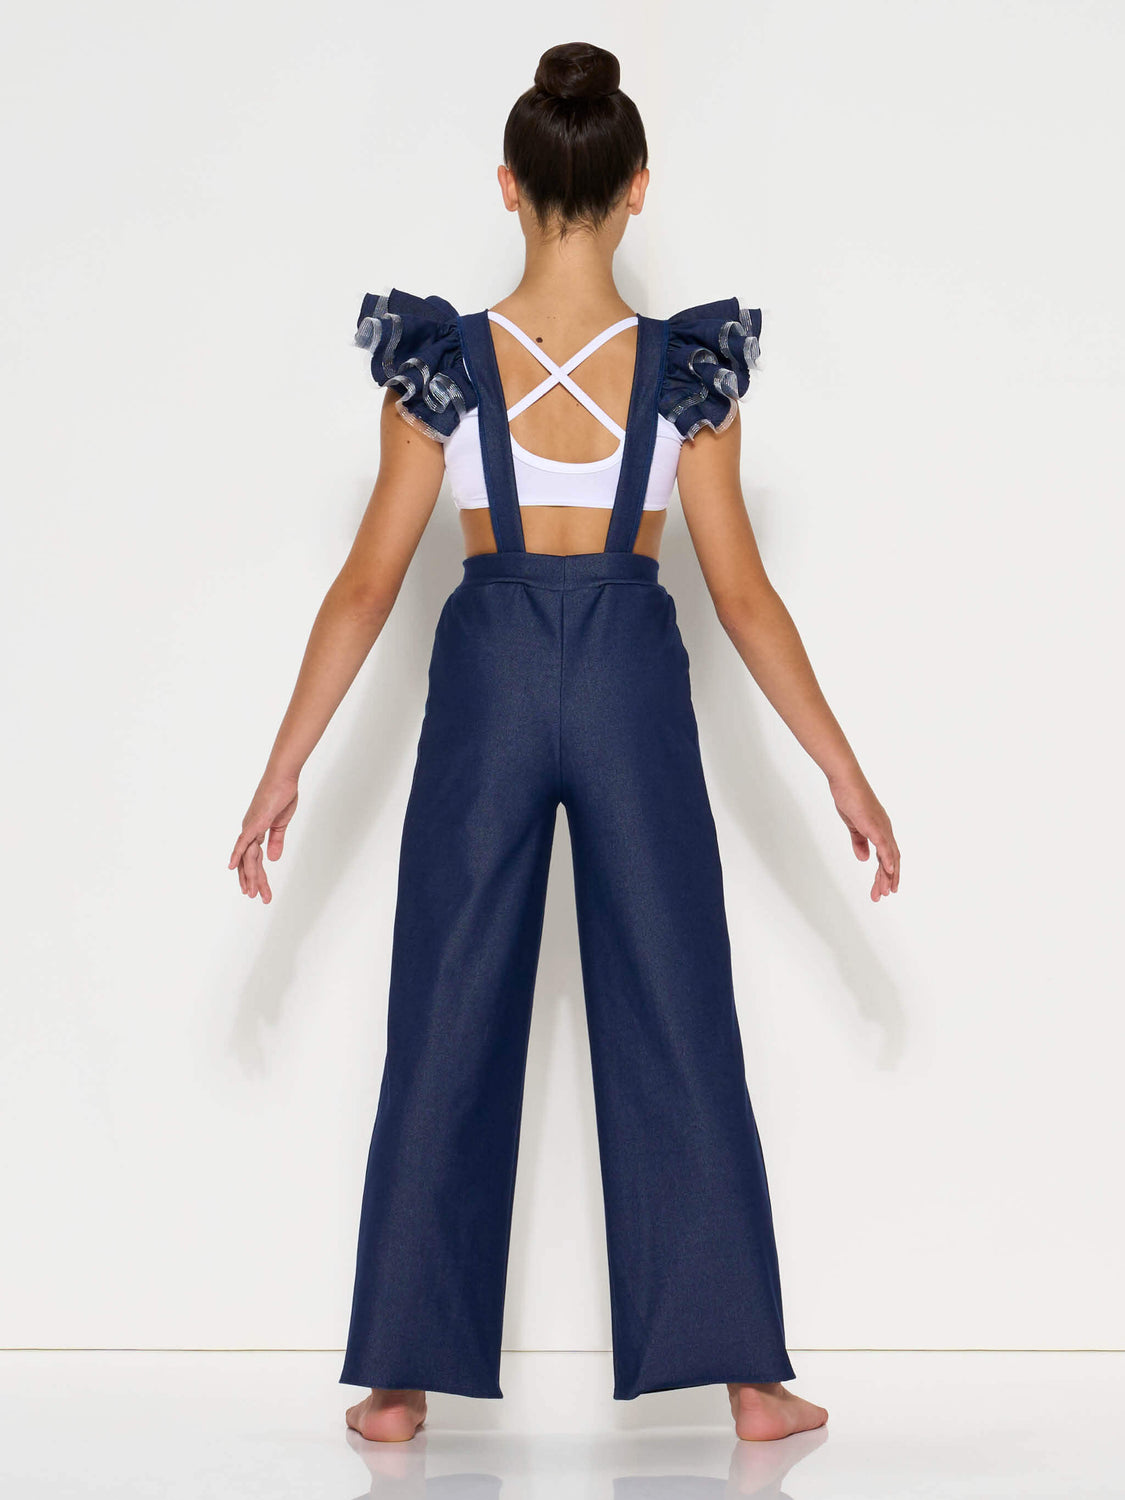 OBSTYLE Chic Design Square Neck High Waist Belted Suspenders Jumpsuit《BA7152》  2024 | Buy OBSTYLE Online | ZALORA Hong Kong